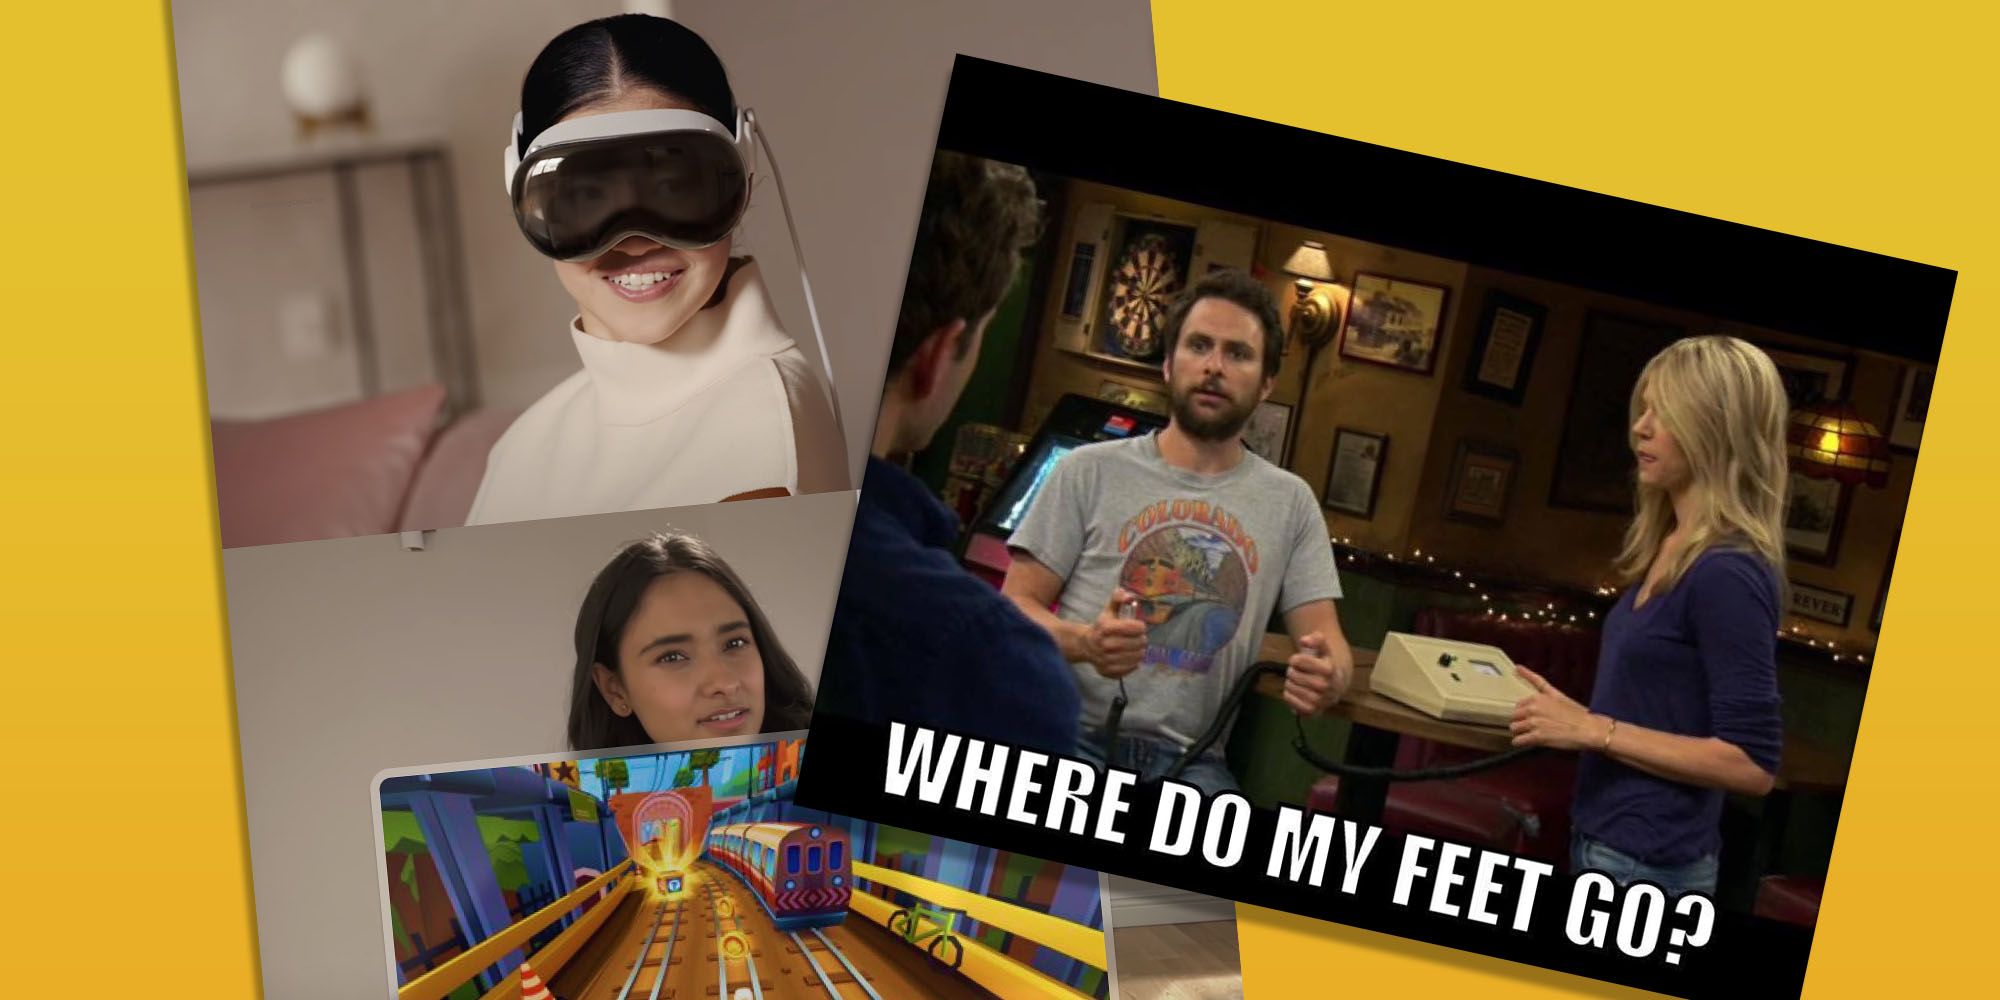 Apple Glasses memes, left showing the user watching TikTok games while listening to their friend, right showing Charlie from It's Always Sunny in Philadelphia asking Dee 